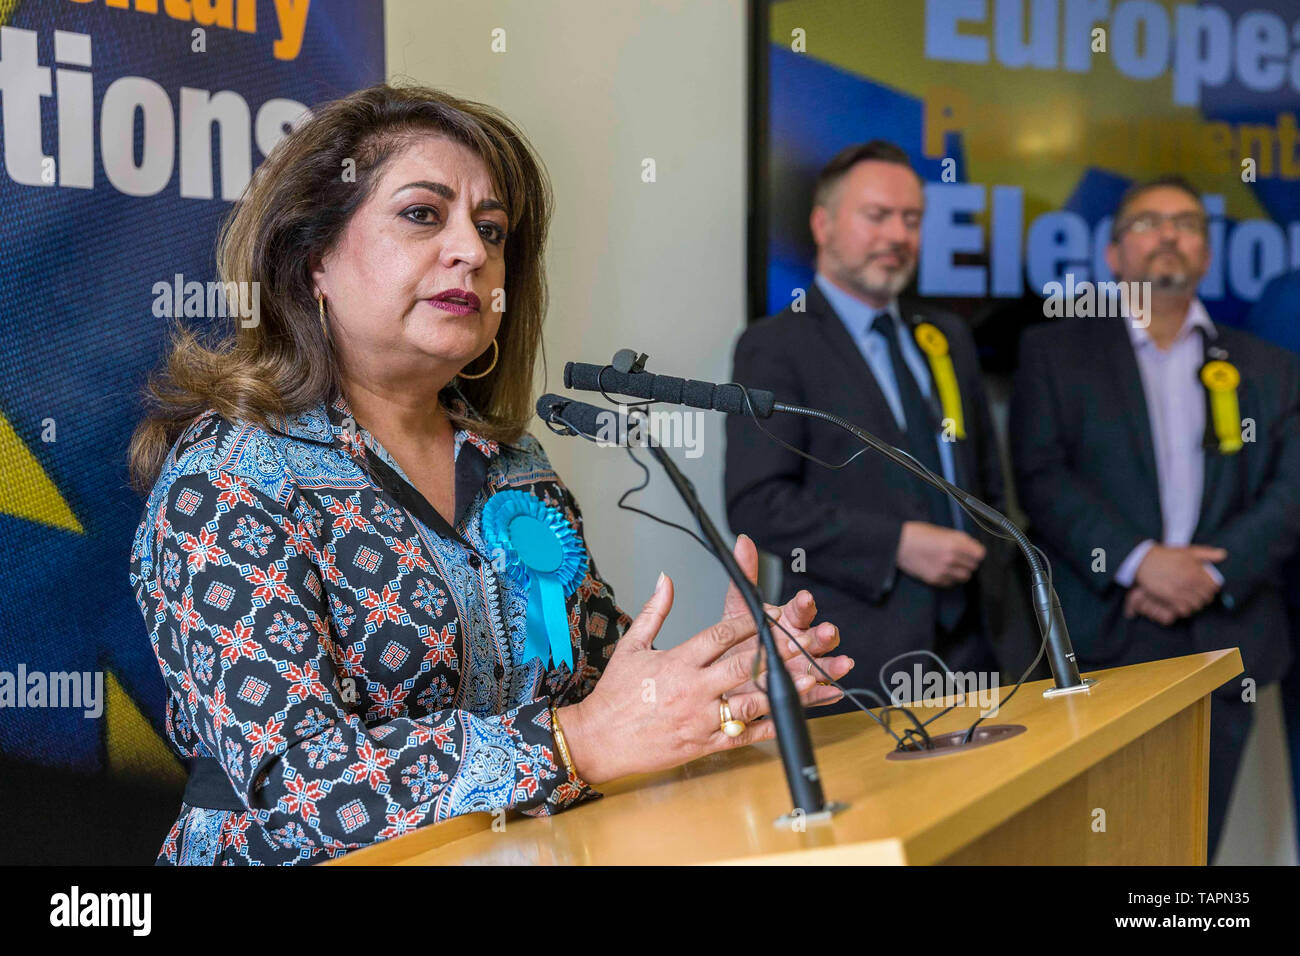 The results of the European Parliamentary Elections for the Scotland Region are announced at the City Chambers in Edinburgh. Scotland's six new MEPs will be the SNP's Alyn Smith, Christian Allard and Aileen McLeod, Louis Stedman-Bruce of the Brexit Party, Sheila Ritchie of the Liberal Democrats and Baroness Nosheena Mobarik of the Conservatives. Pictured: Baroness Nosheena Mobarik of the Conservatives Stock Photo